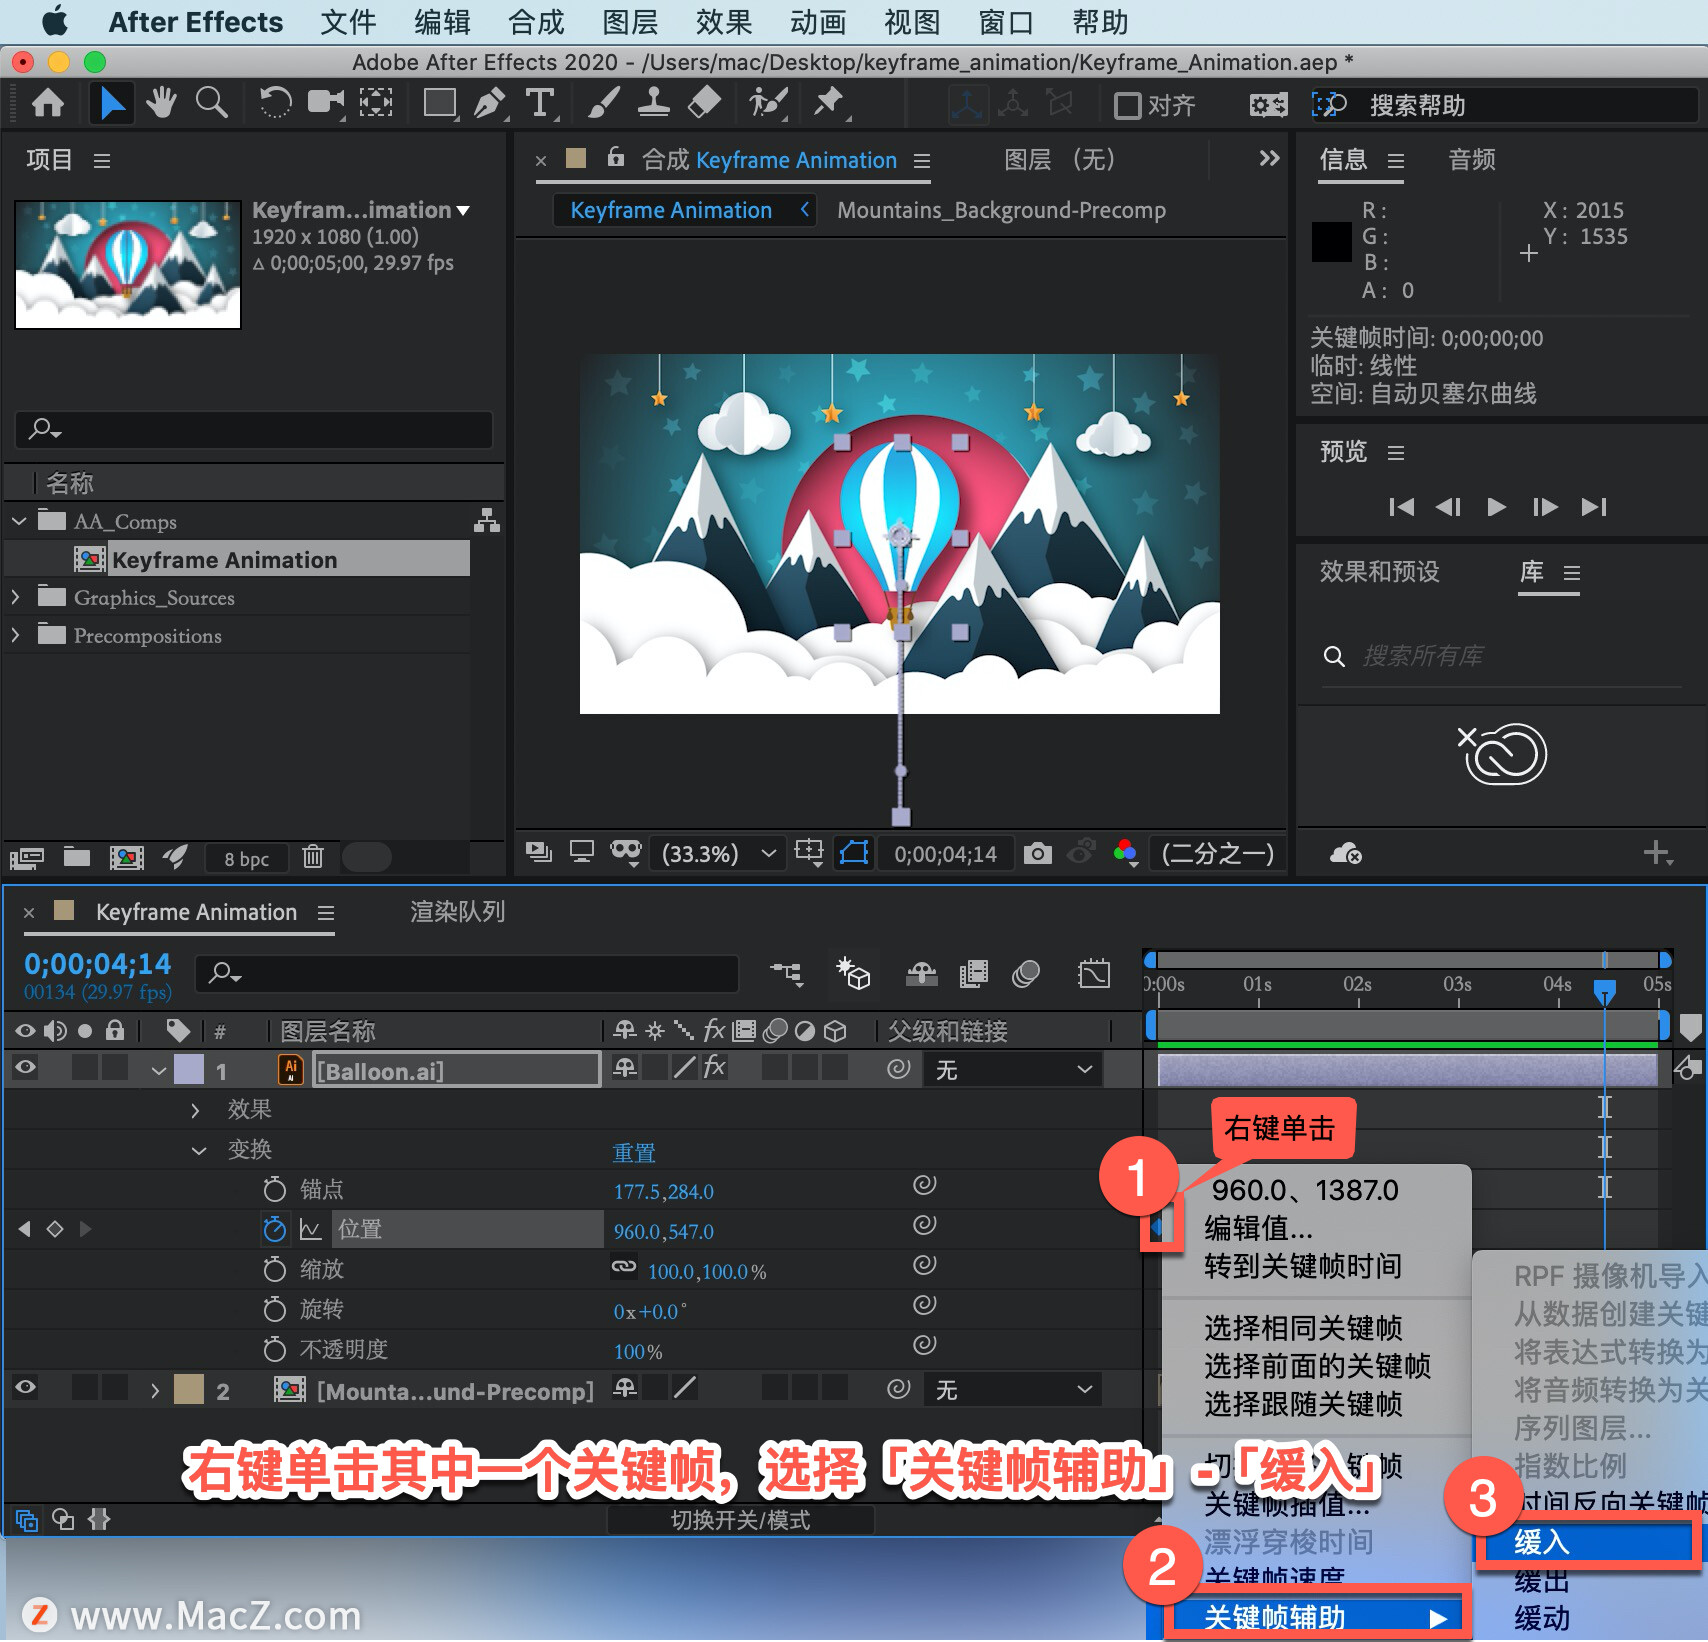 After Effects 教程「62」，如何在 After Effects 中调整关键帧的运动路径？